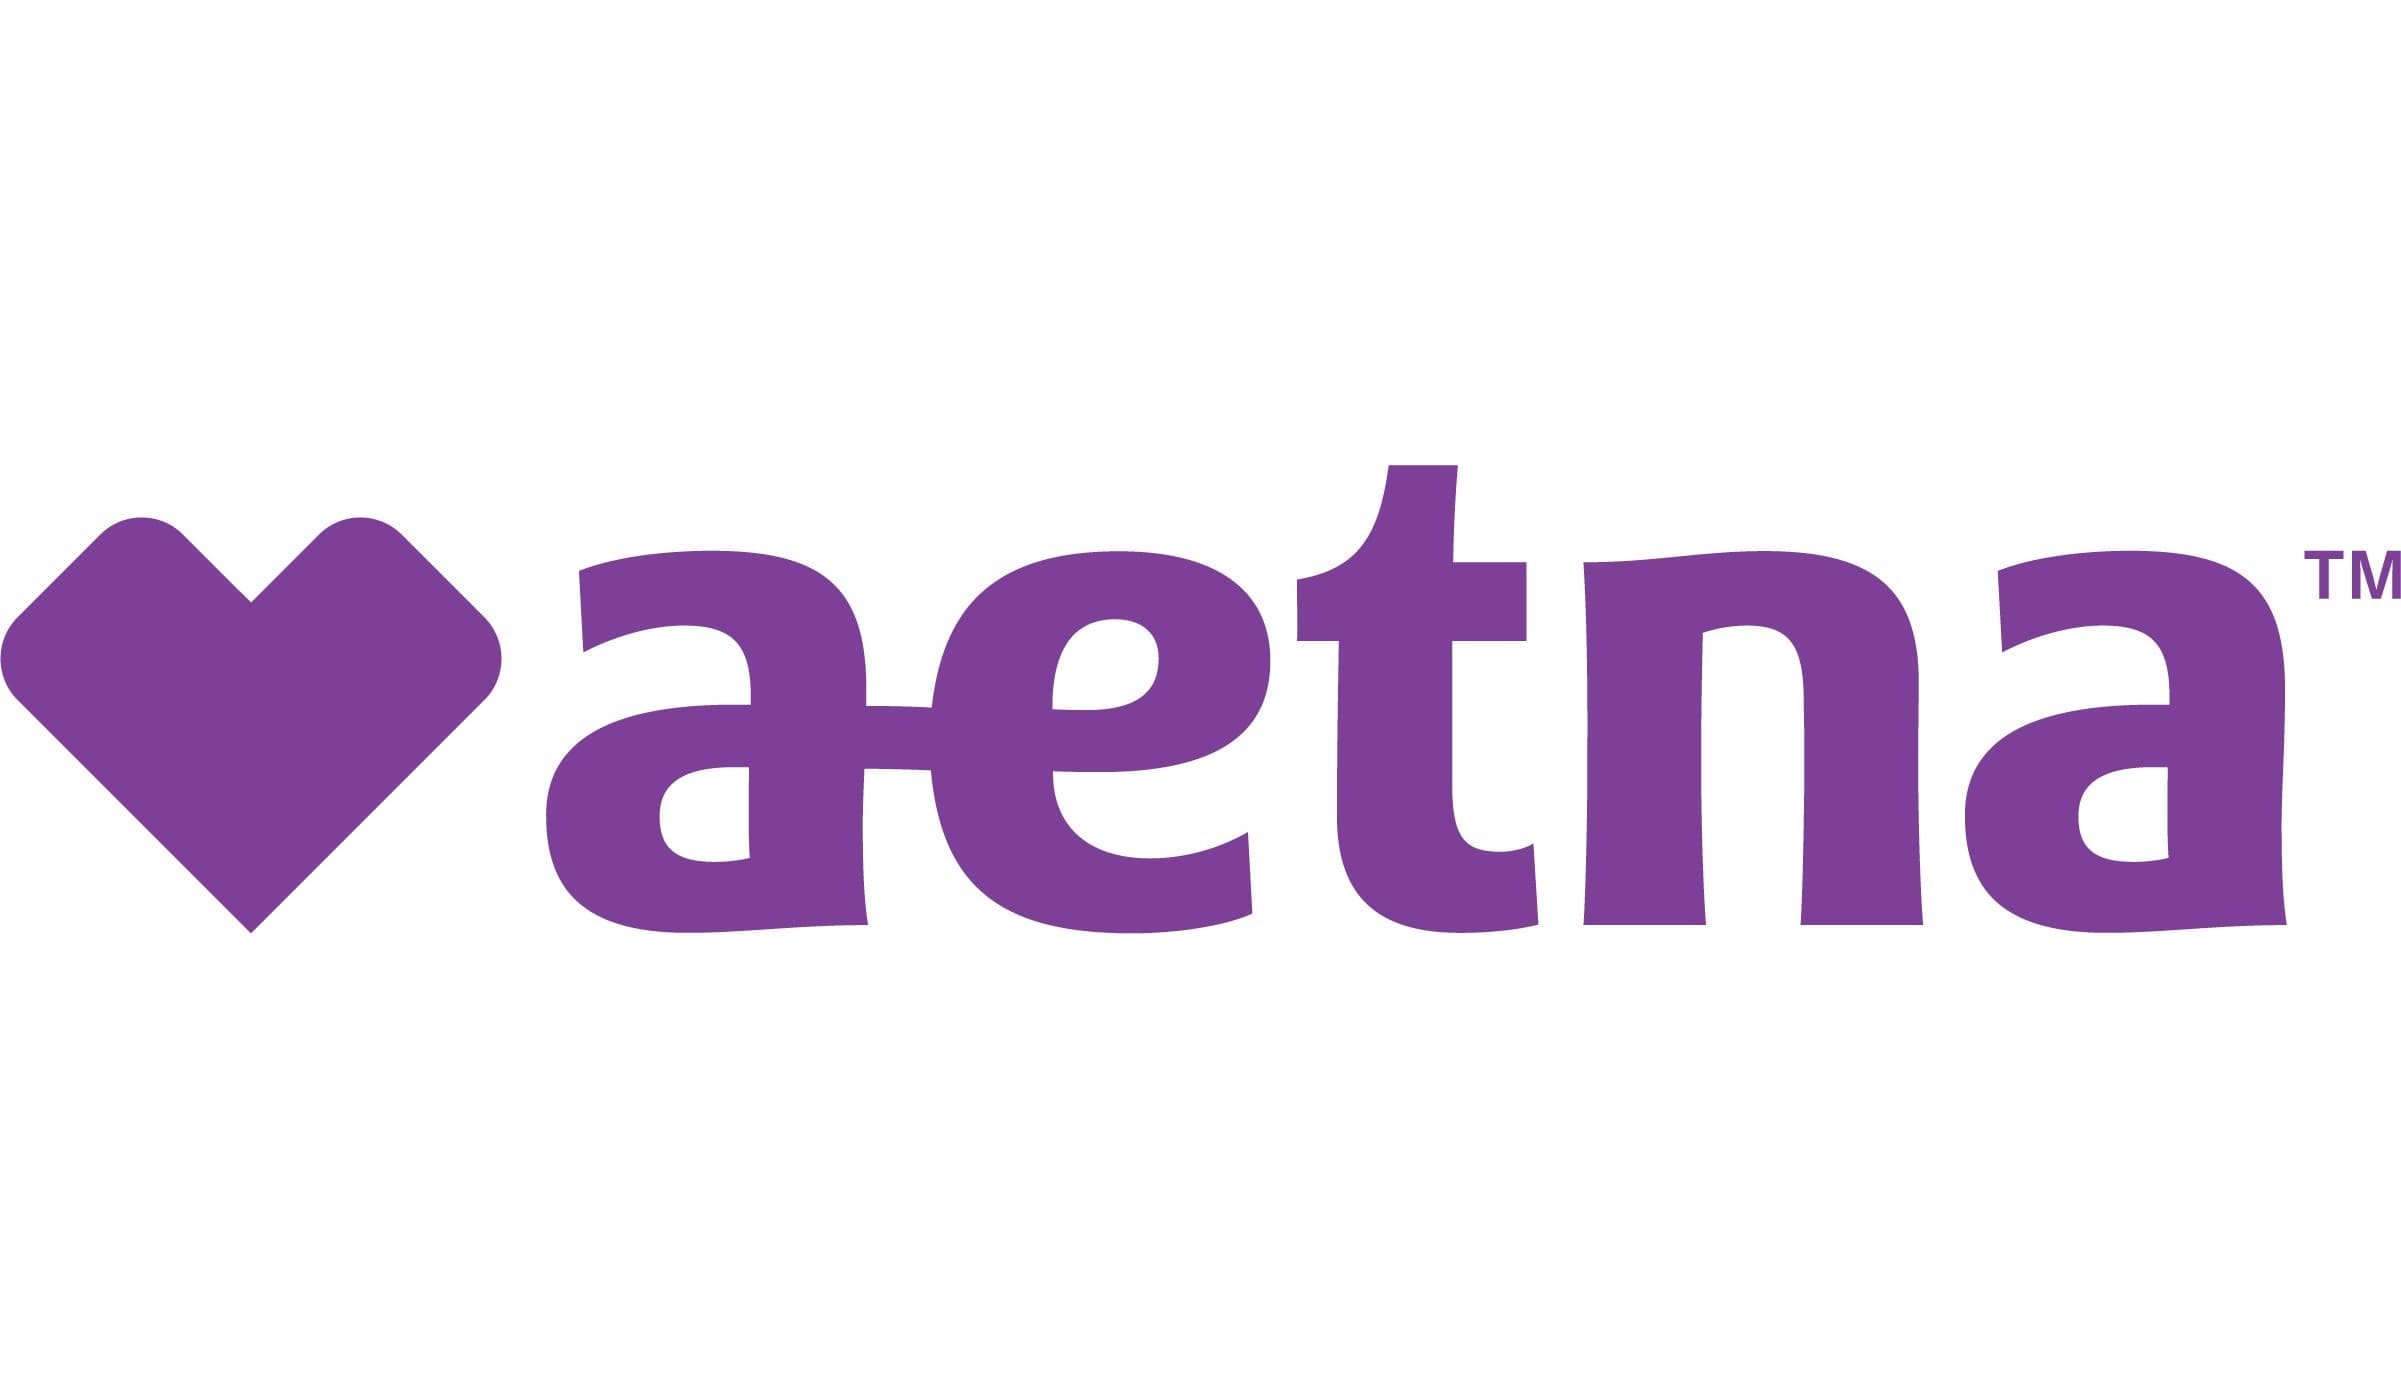 Aetna logo in purple and white